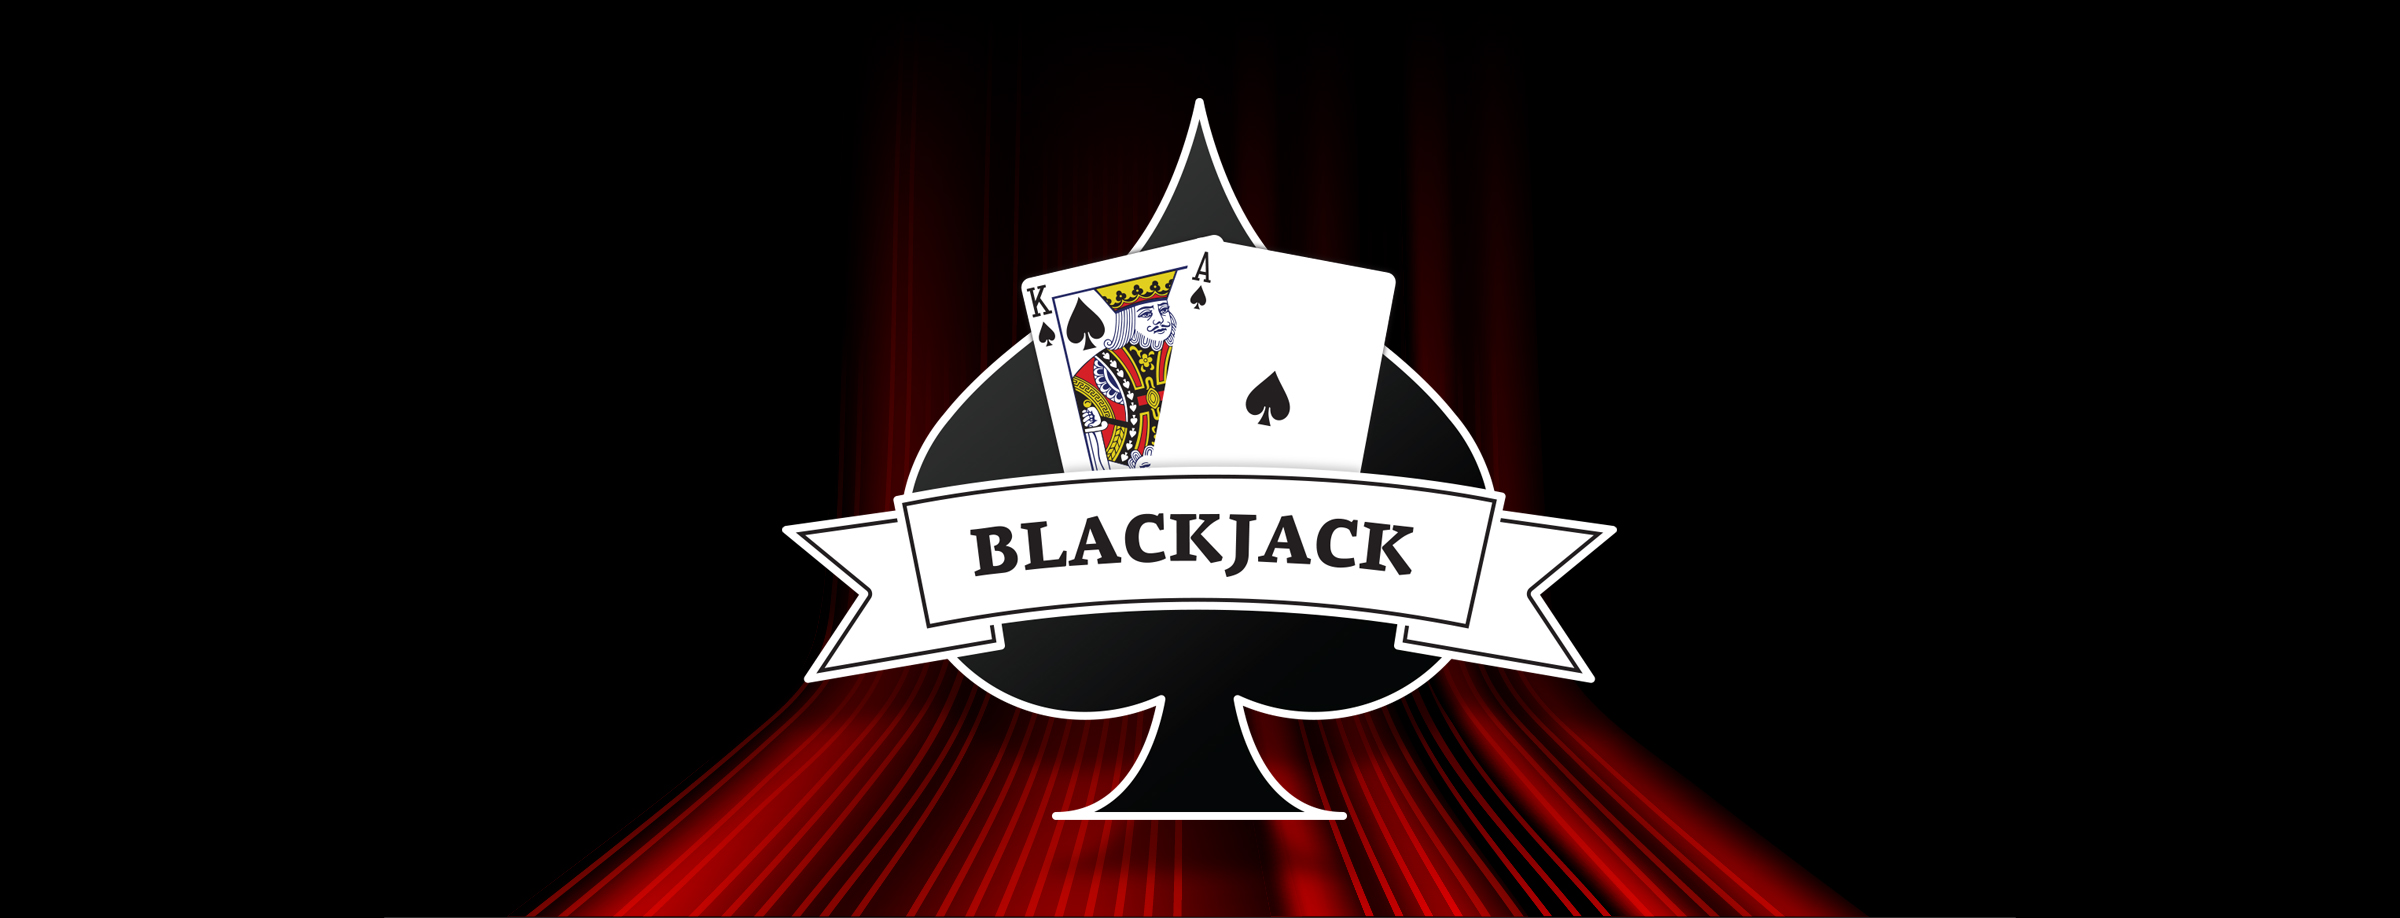 If you're looking for an edge on your next Blackjack game, Bodog has compiled some tried and tested tips to get you levelled-up.